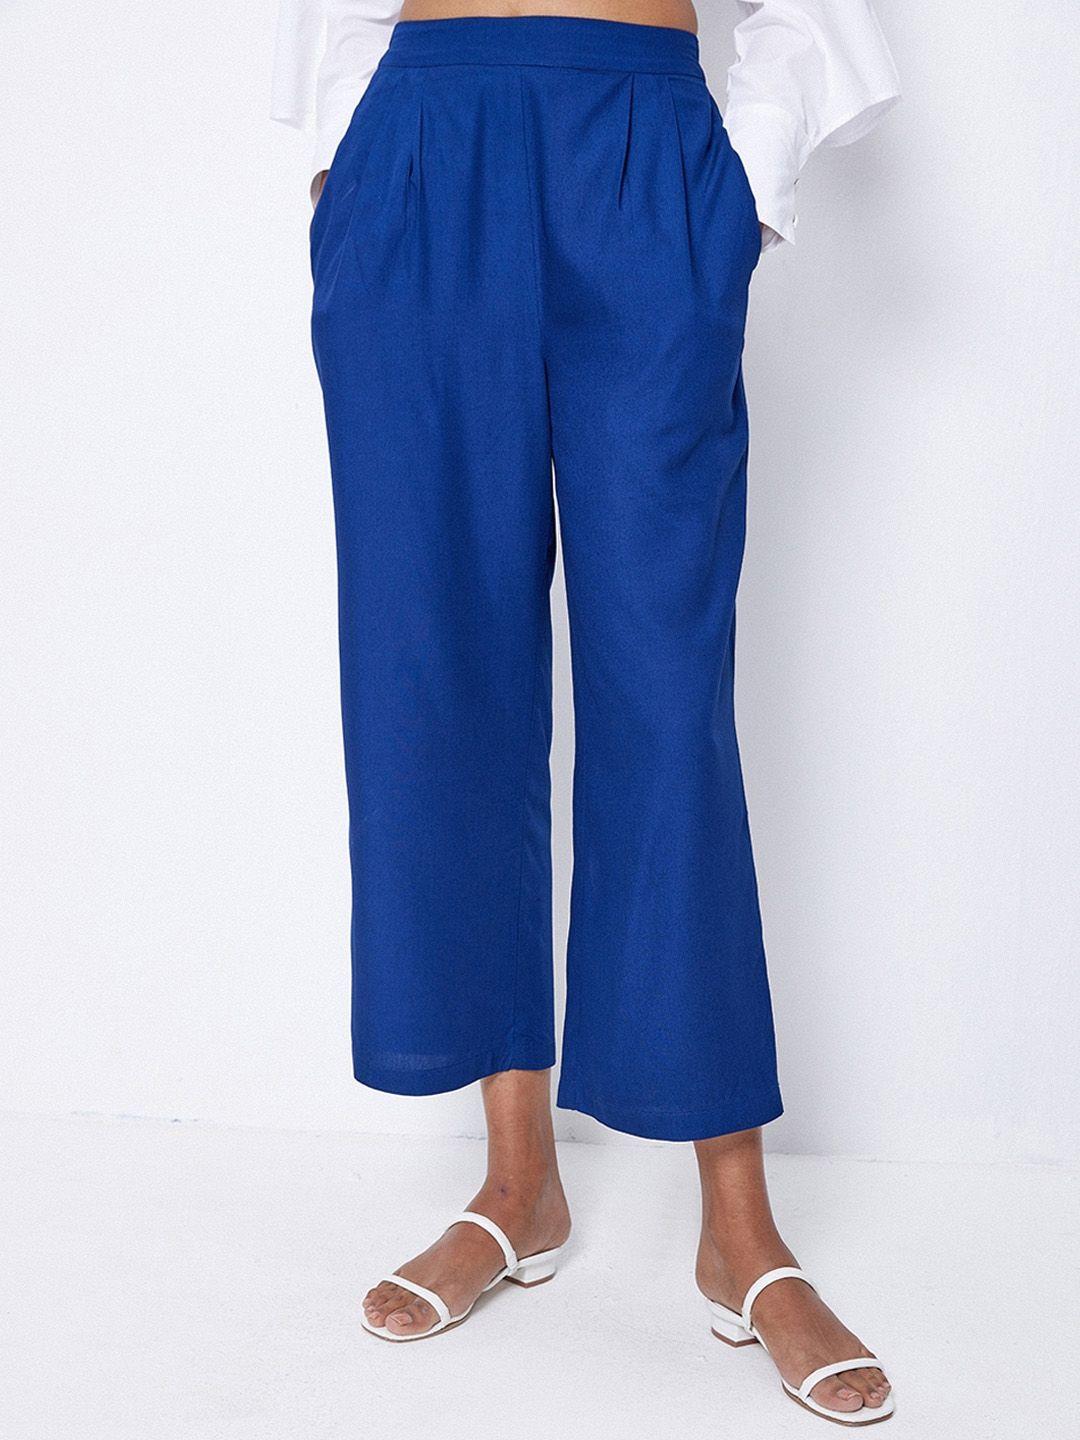 ancestry-women-navy-blue-pleated-culottes-trousers